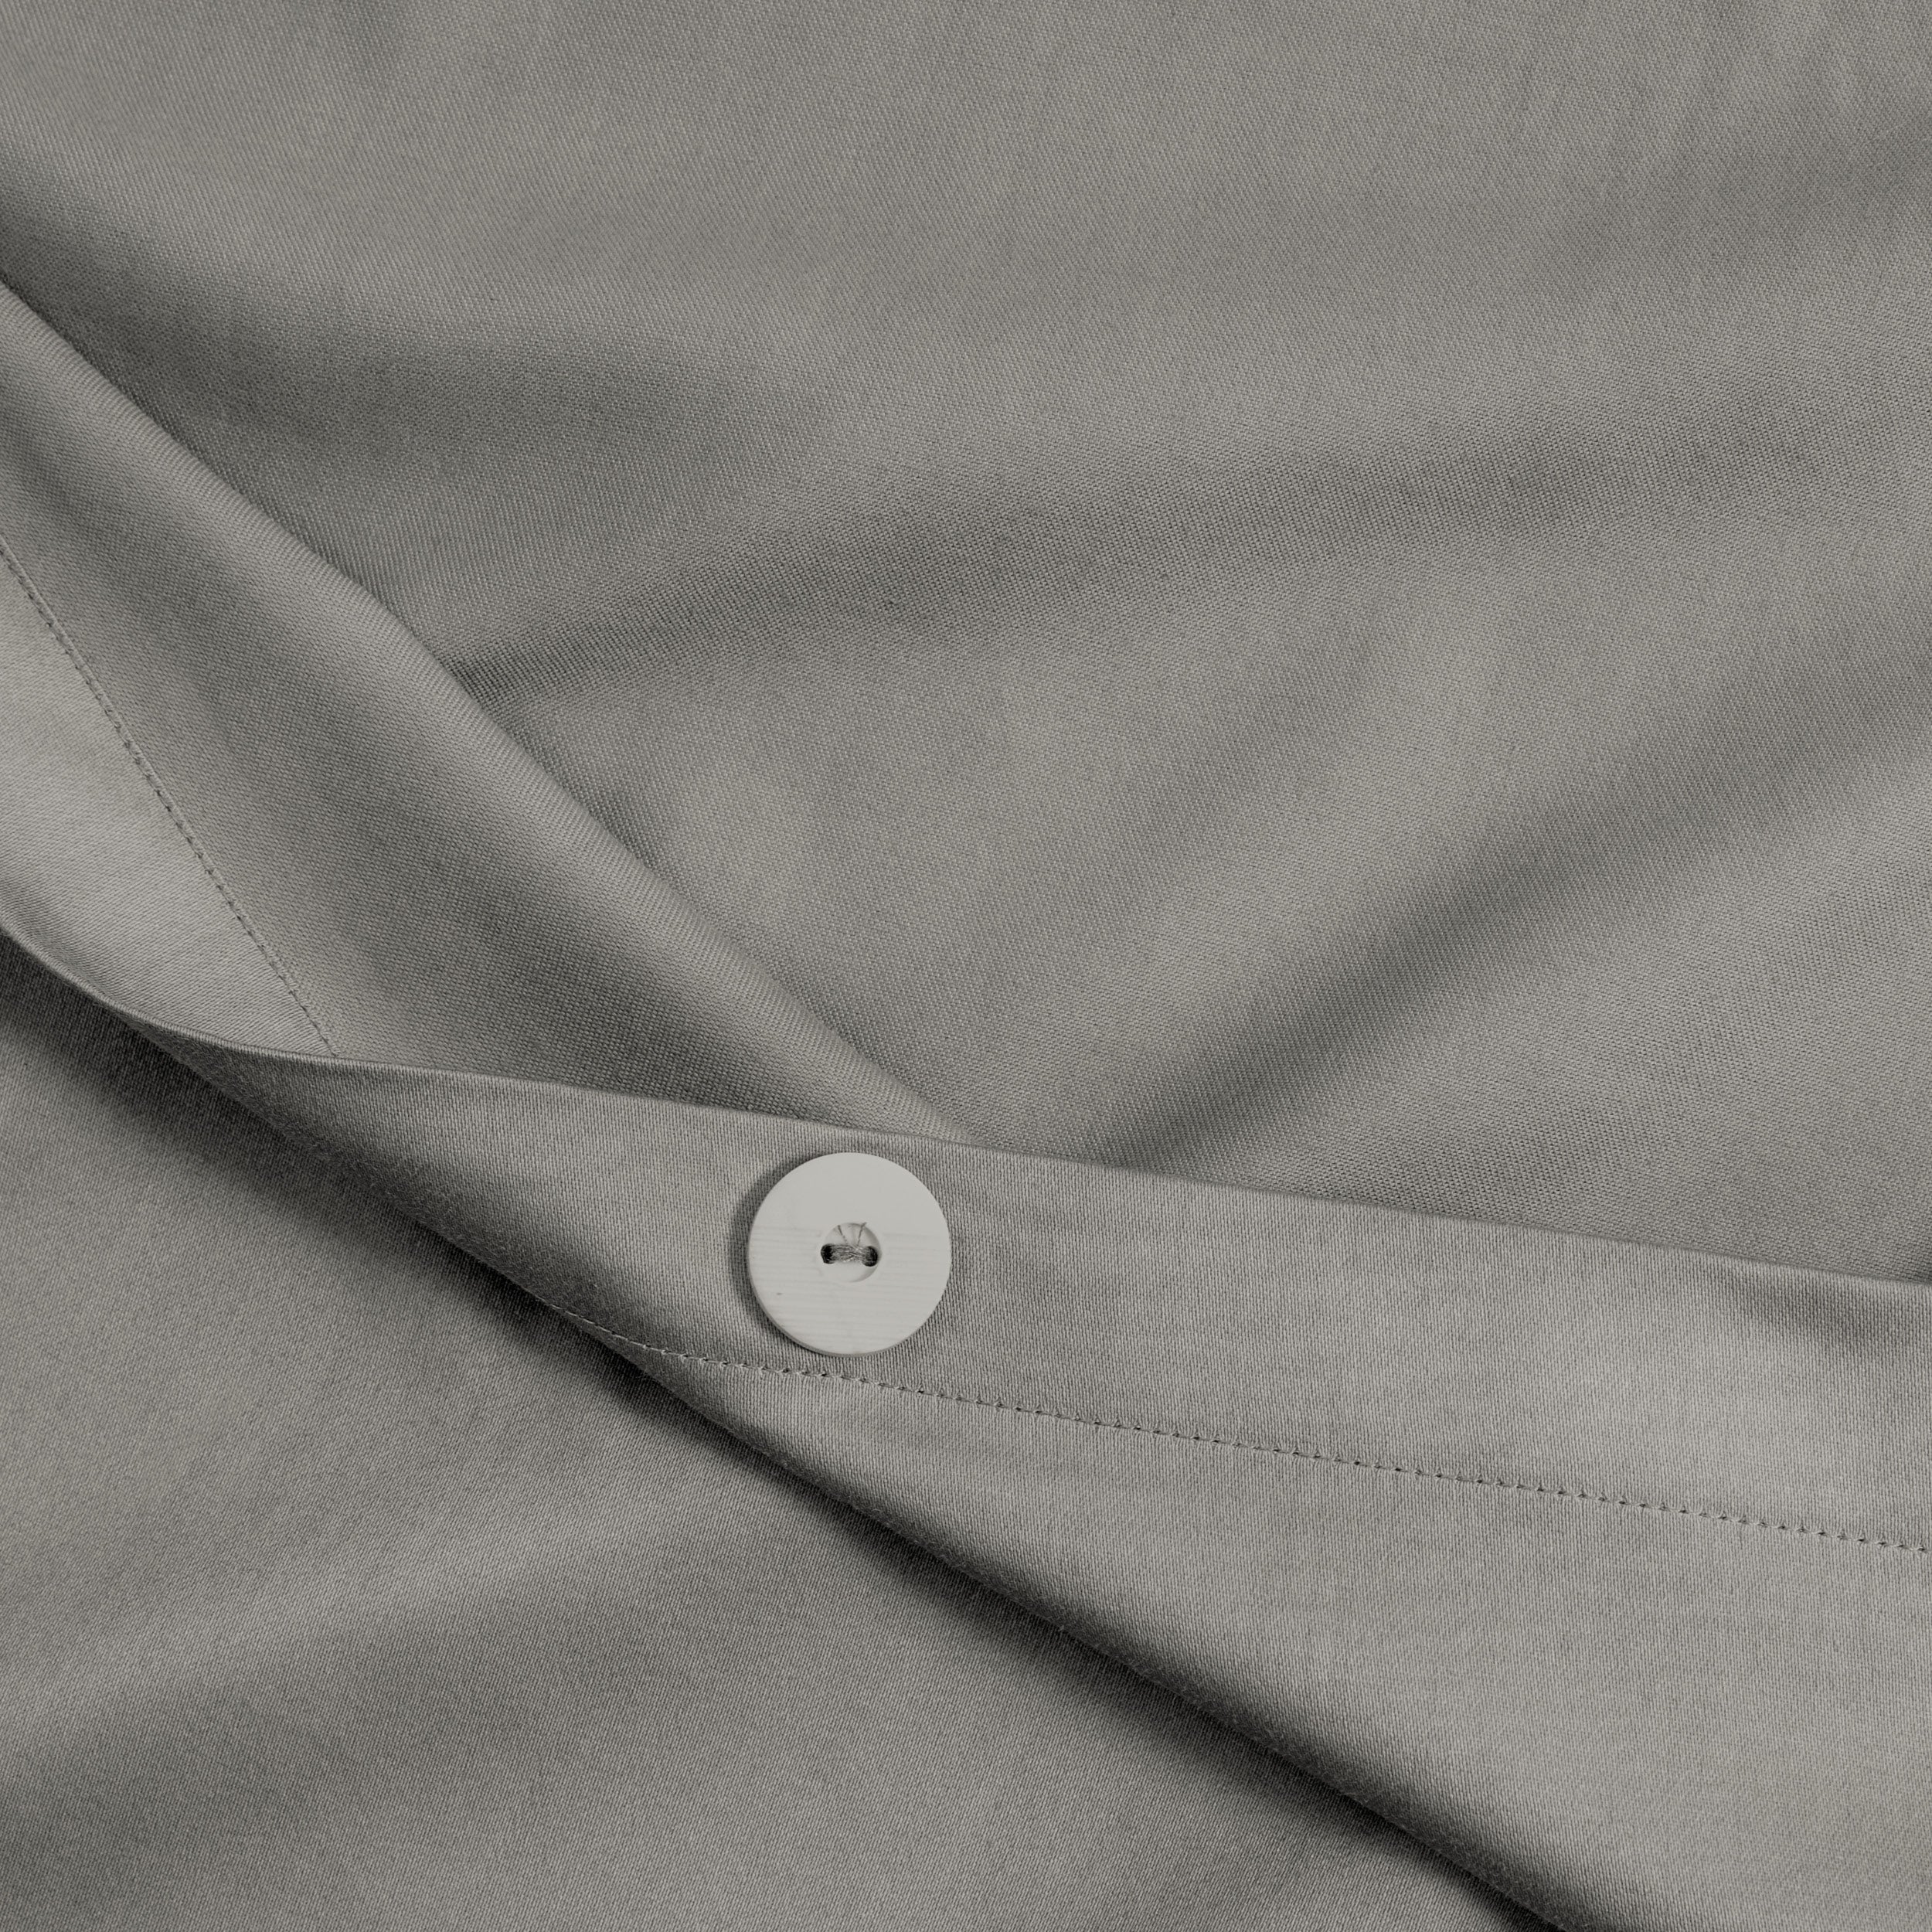 A close view of the texture and buttons of the duvet cover.